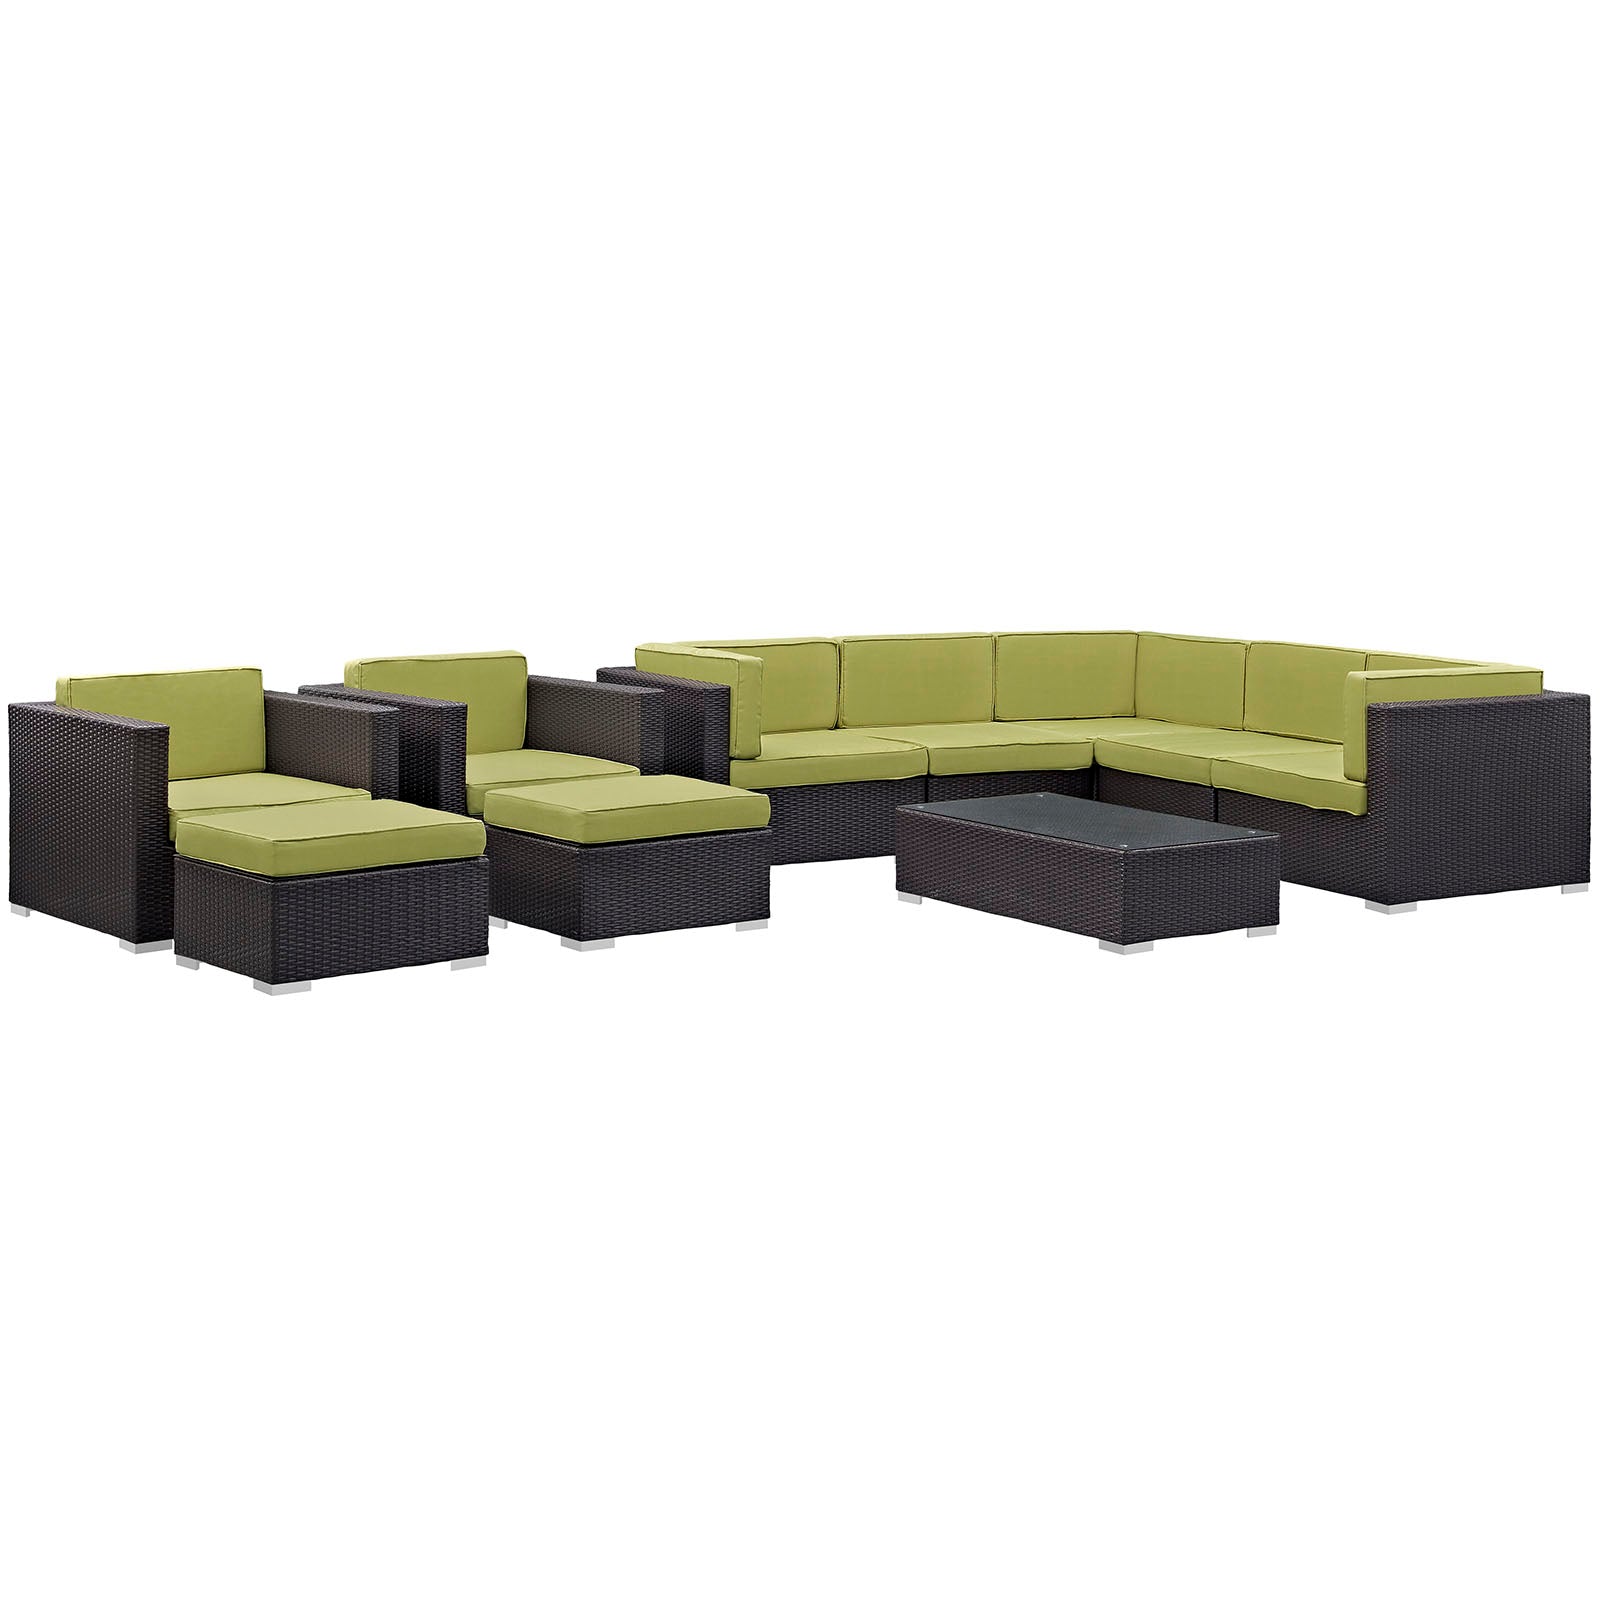 Avia 10 Piece Outdoor Patio Sectional Set-Outdoor Set-Modway-Wall2Wall Furnishings